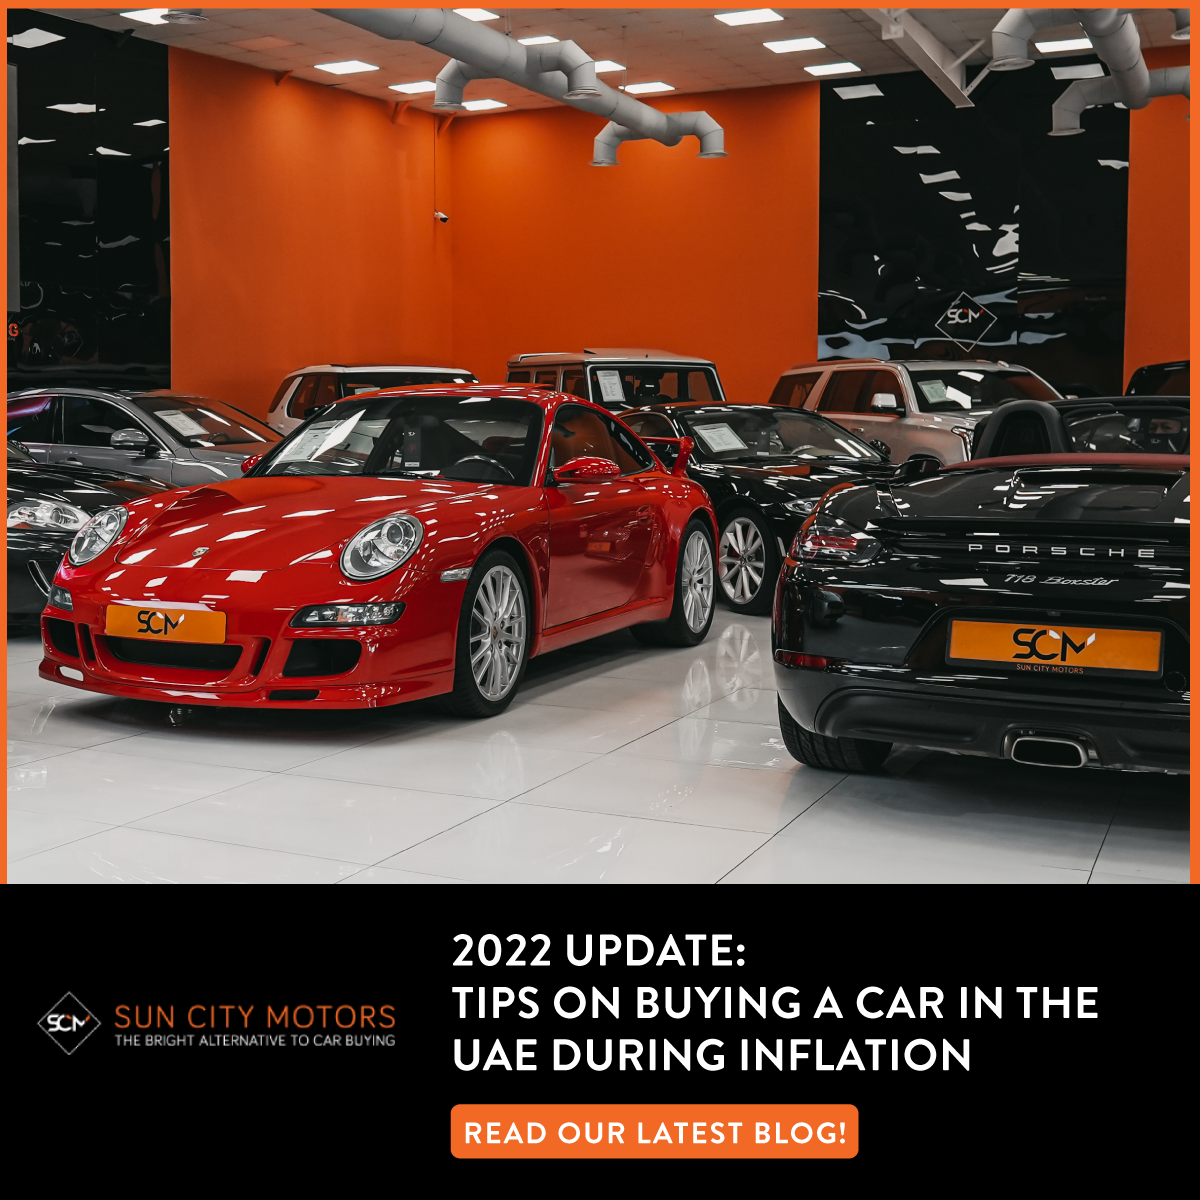 2022 Update: Tips on Buying a Car in the UAE During Inflation